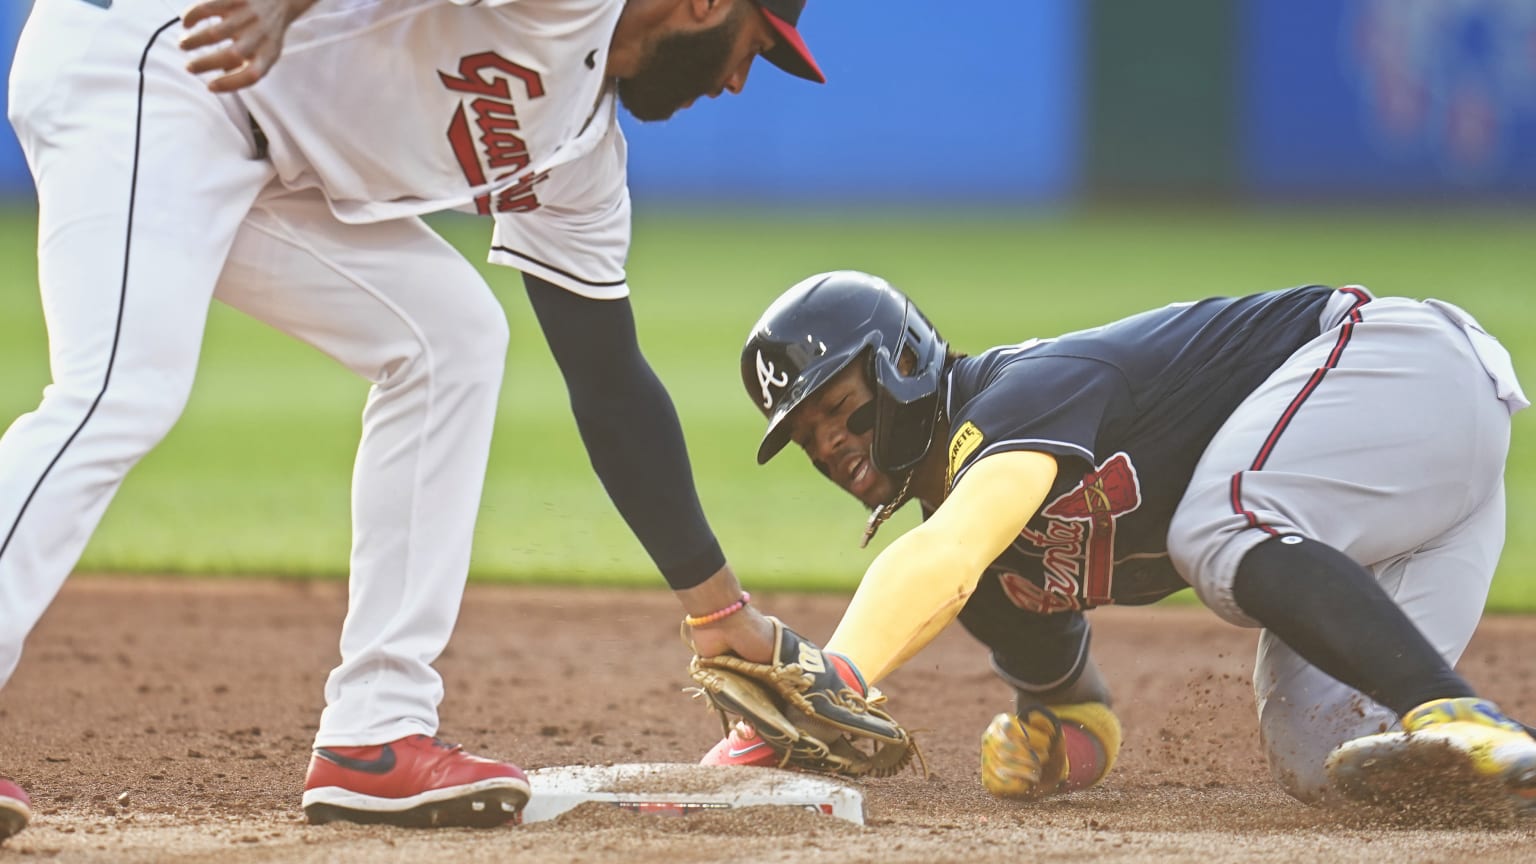 Ronald Acuña Jr. slides into second with a stolen base